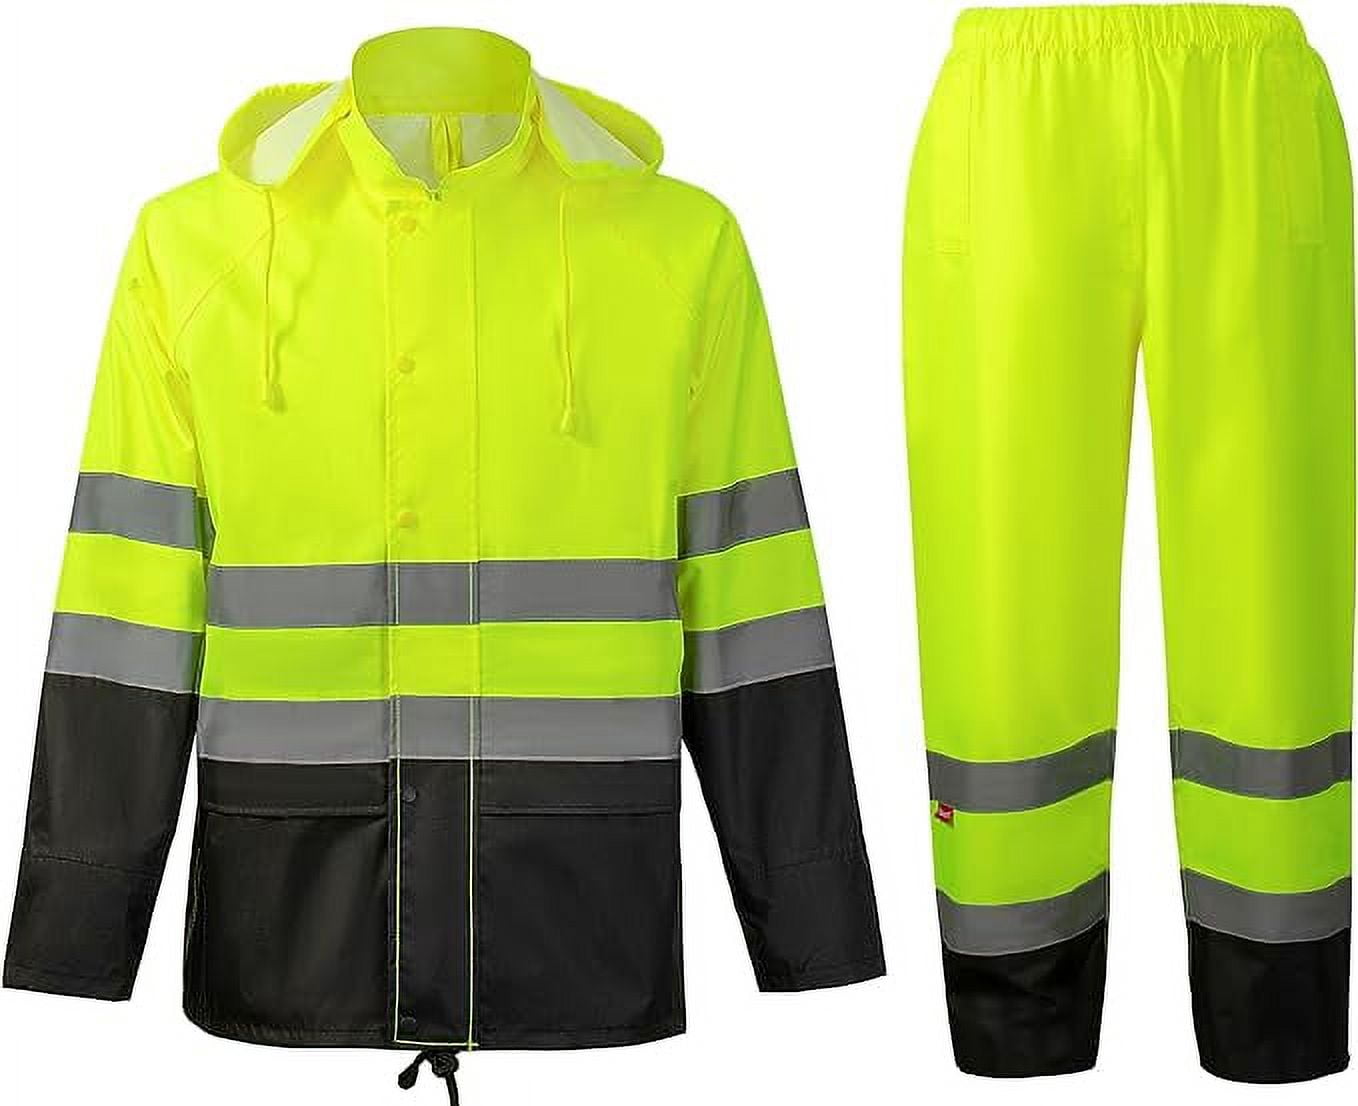 ProtectX Hi Vis Rain Suit for Men, Rain Gear for Men, High Visibility  Waterproof Reflective Safety Jacket, Class 3, Green Large